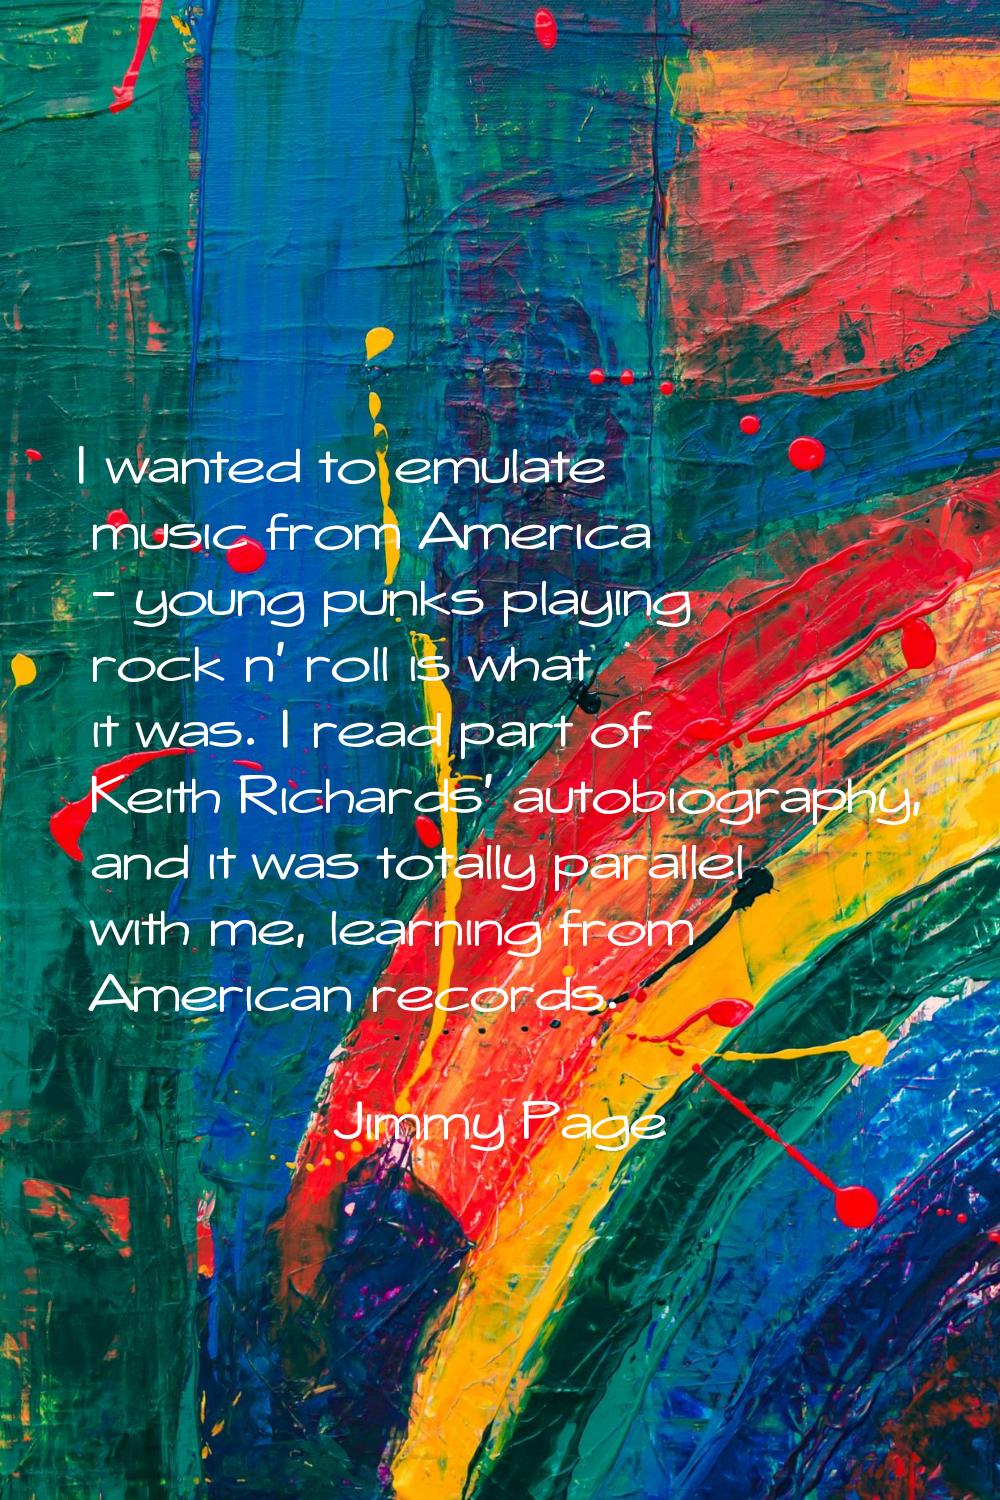 I wanted to emulate music from America - young punks playing rock n' roll is what it was. I read pa